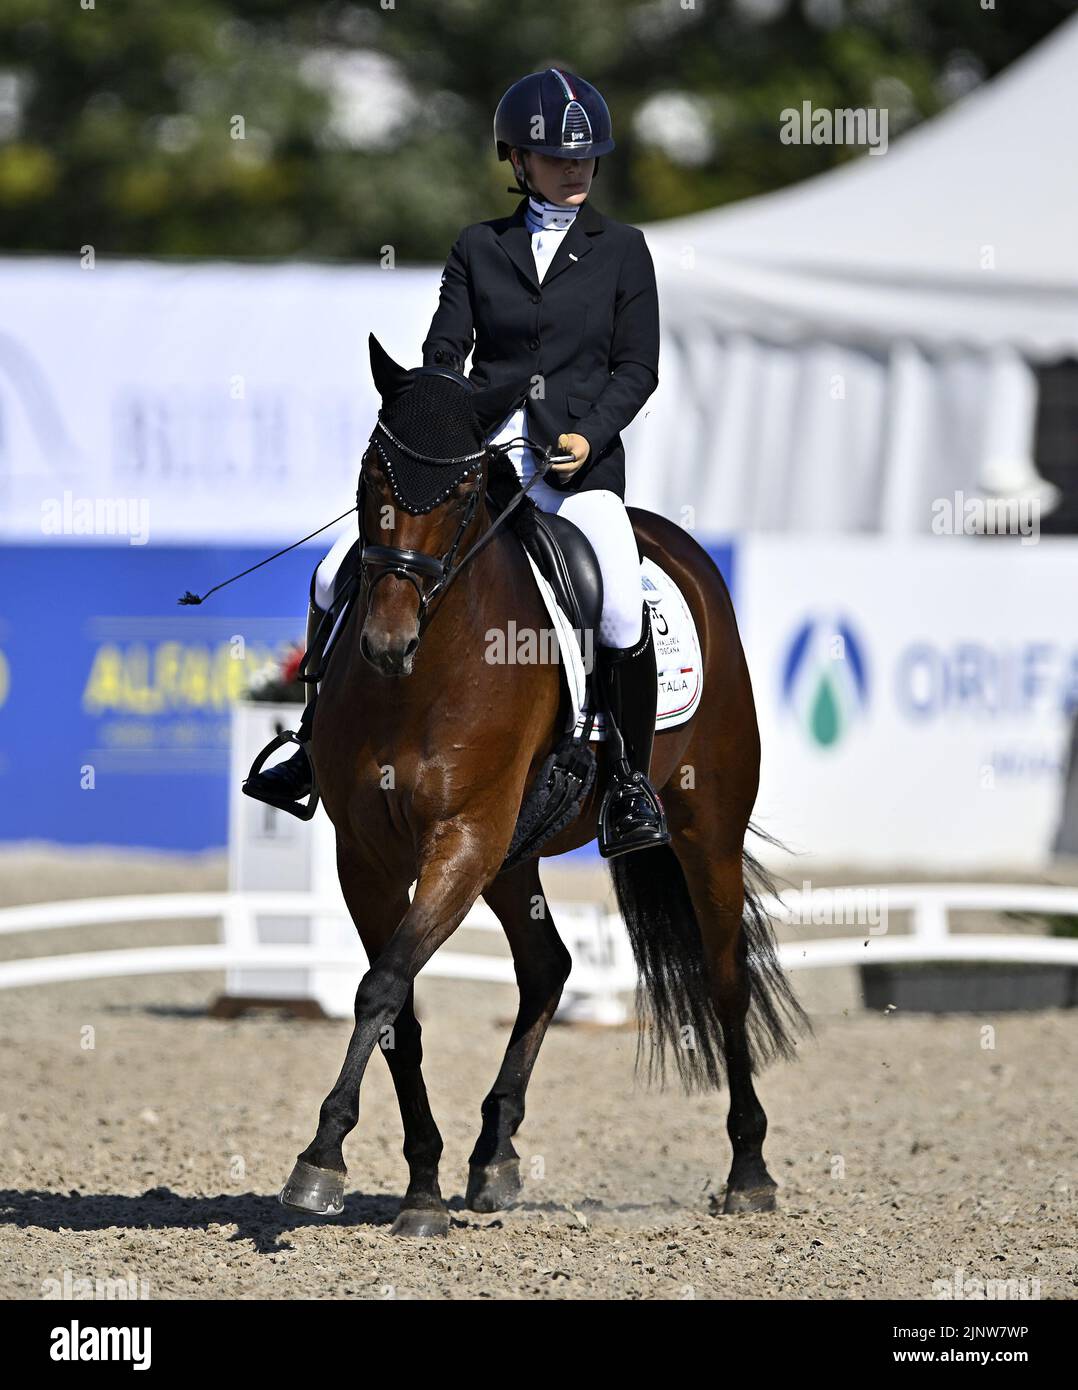 Herning, Denmark. 13th Aug, 2022. World Equestrian Games.Federica Sileoni (ITA) riding BURBERRY during the FEI Para Dressage Team championships - Grade III. Credit: Sport In Pictures/Alamy Live News Stock Photo